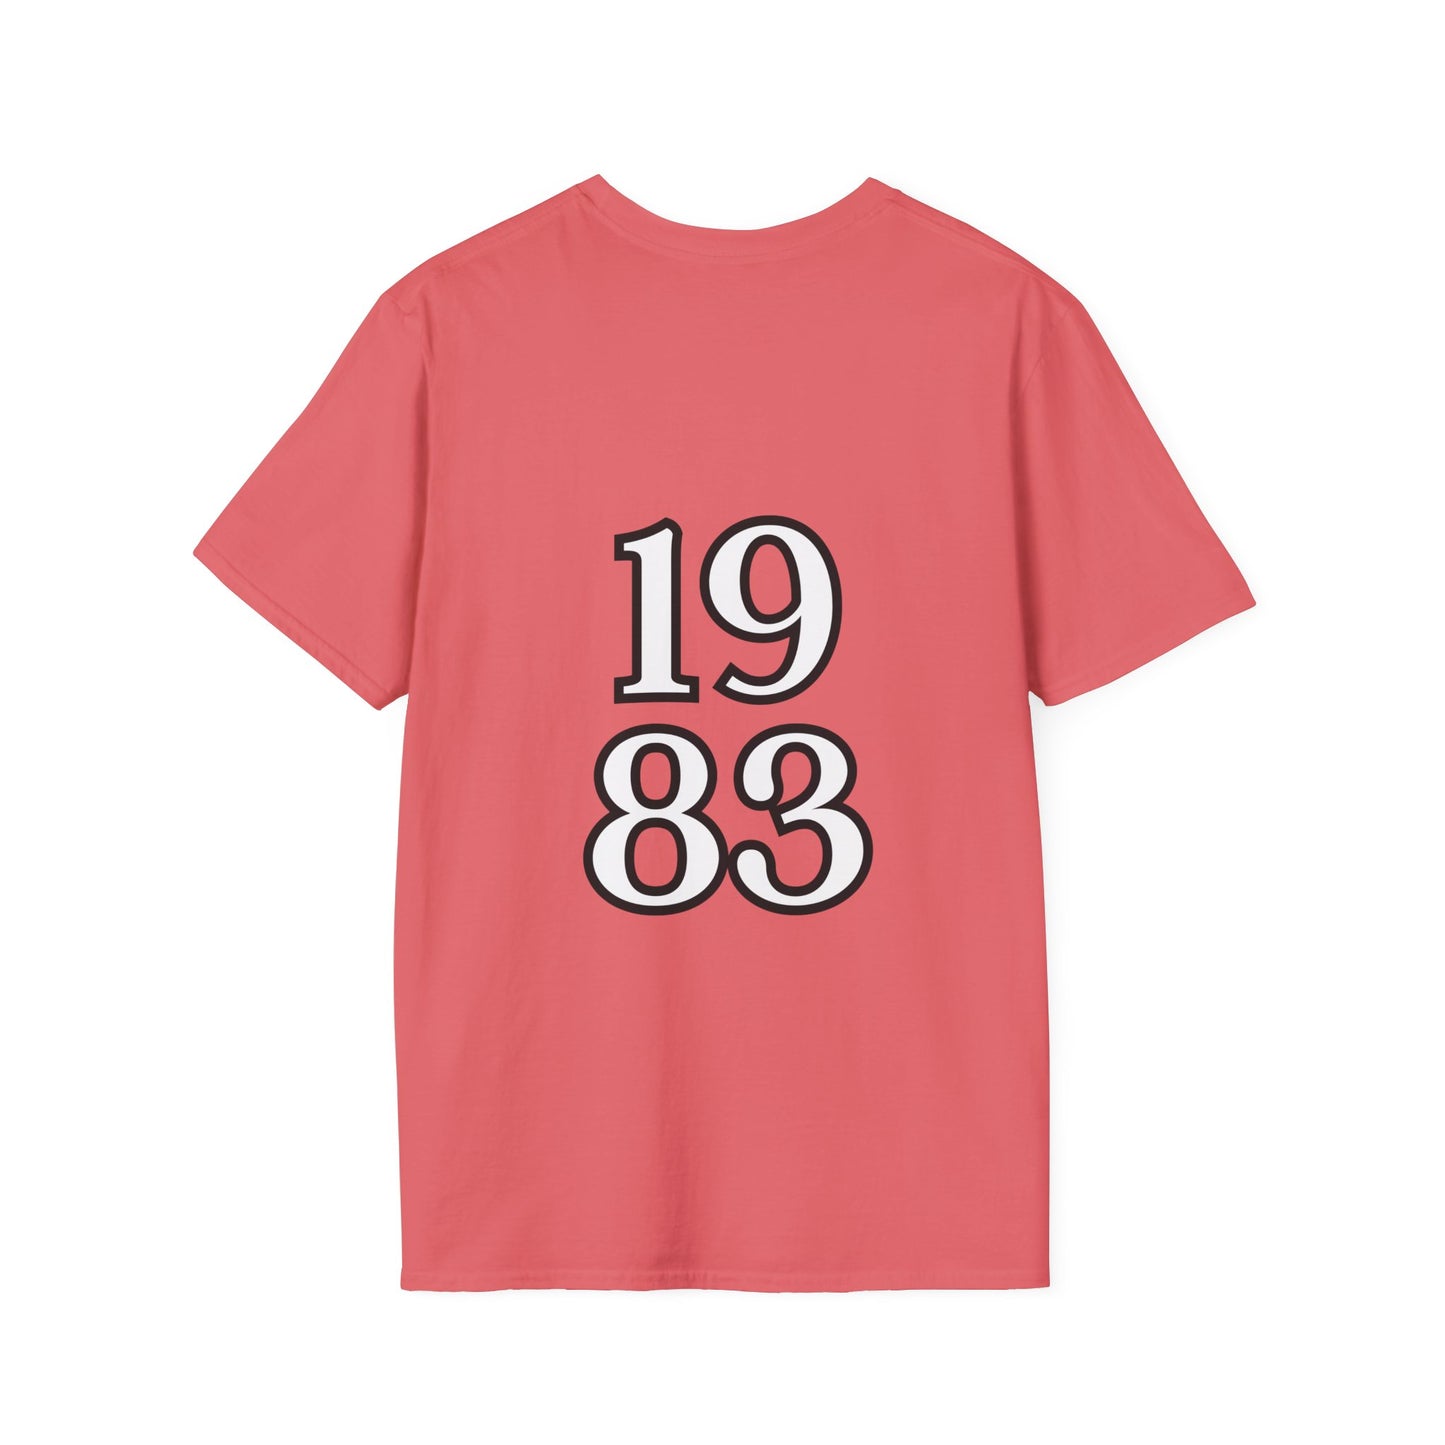 1983 x Years Collection - tee